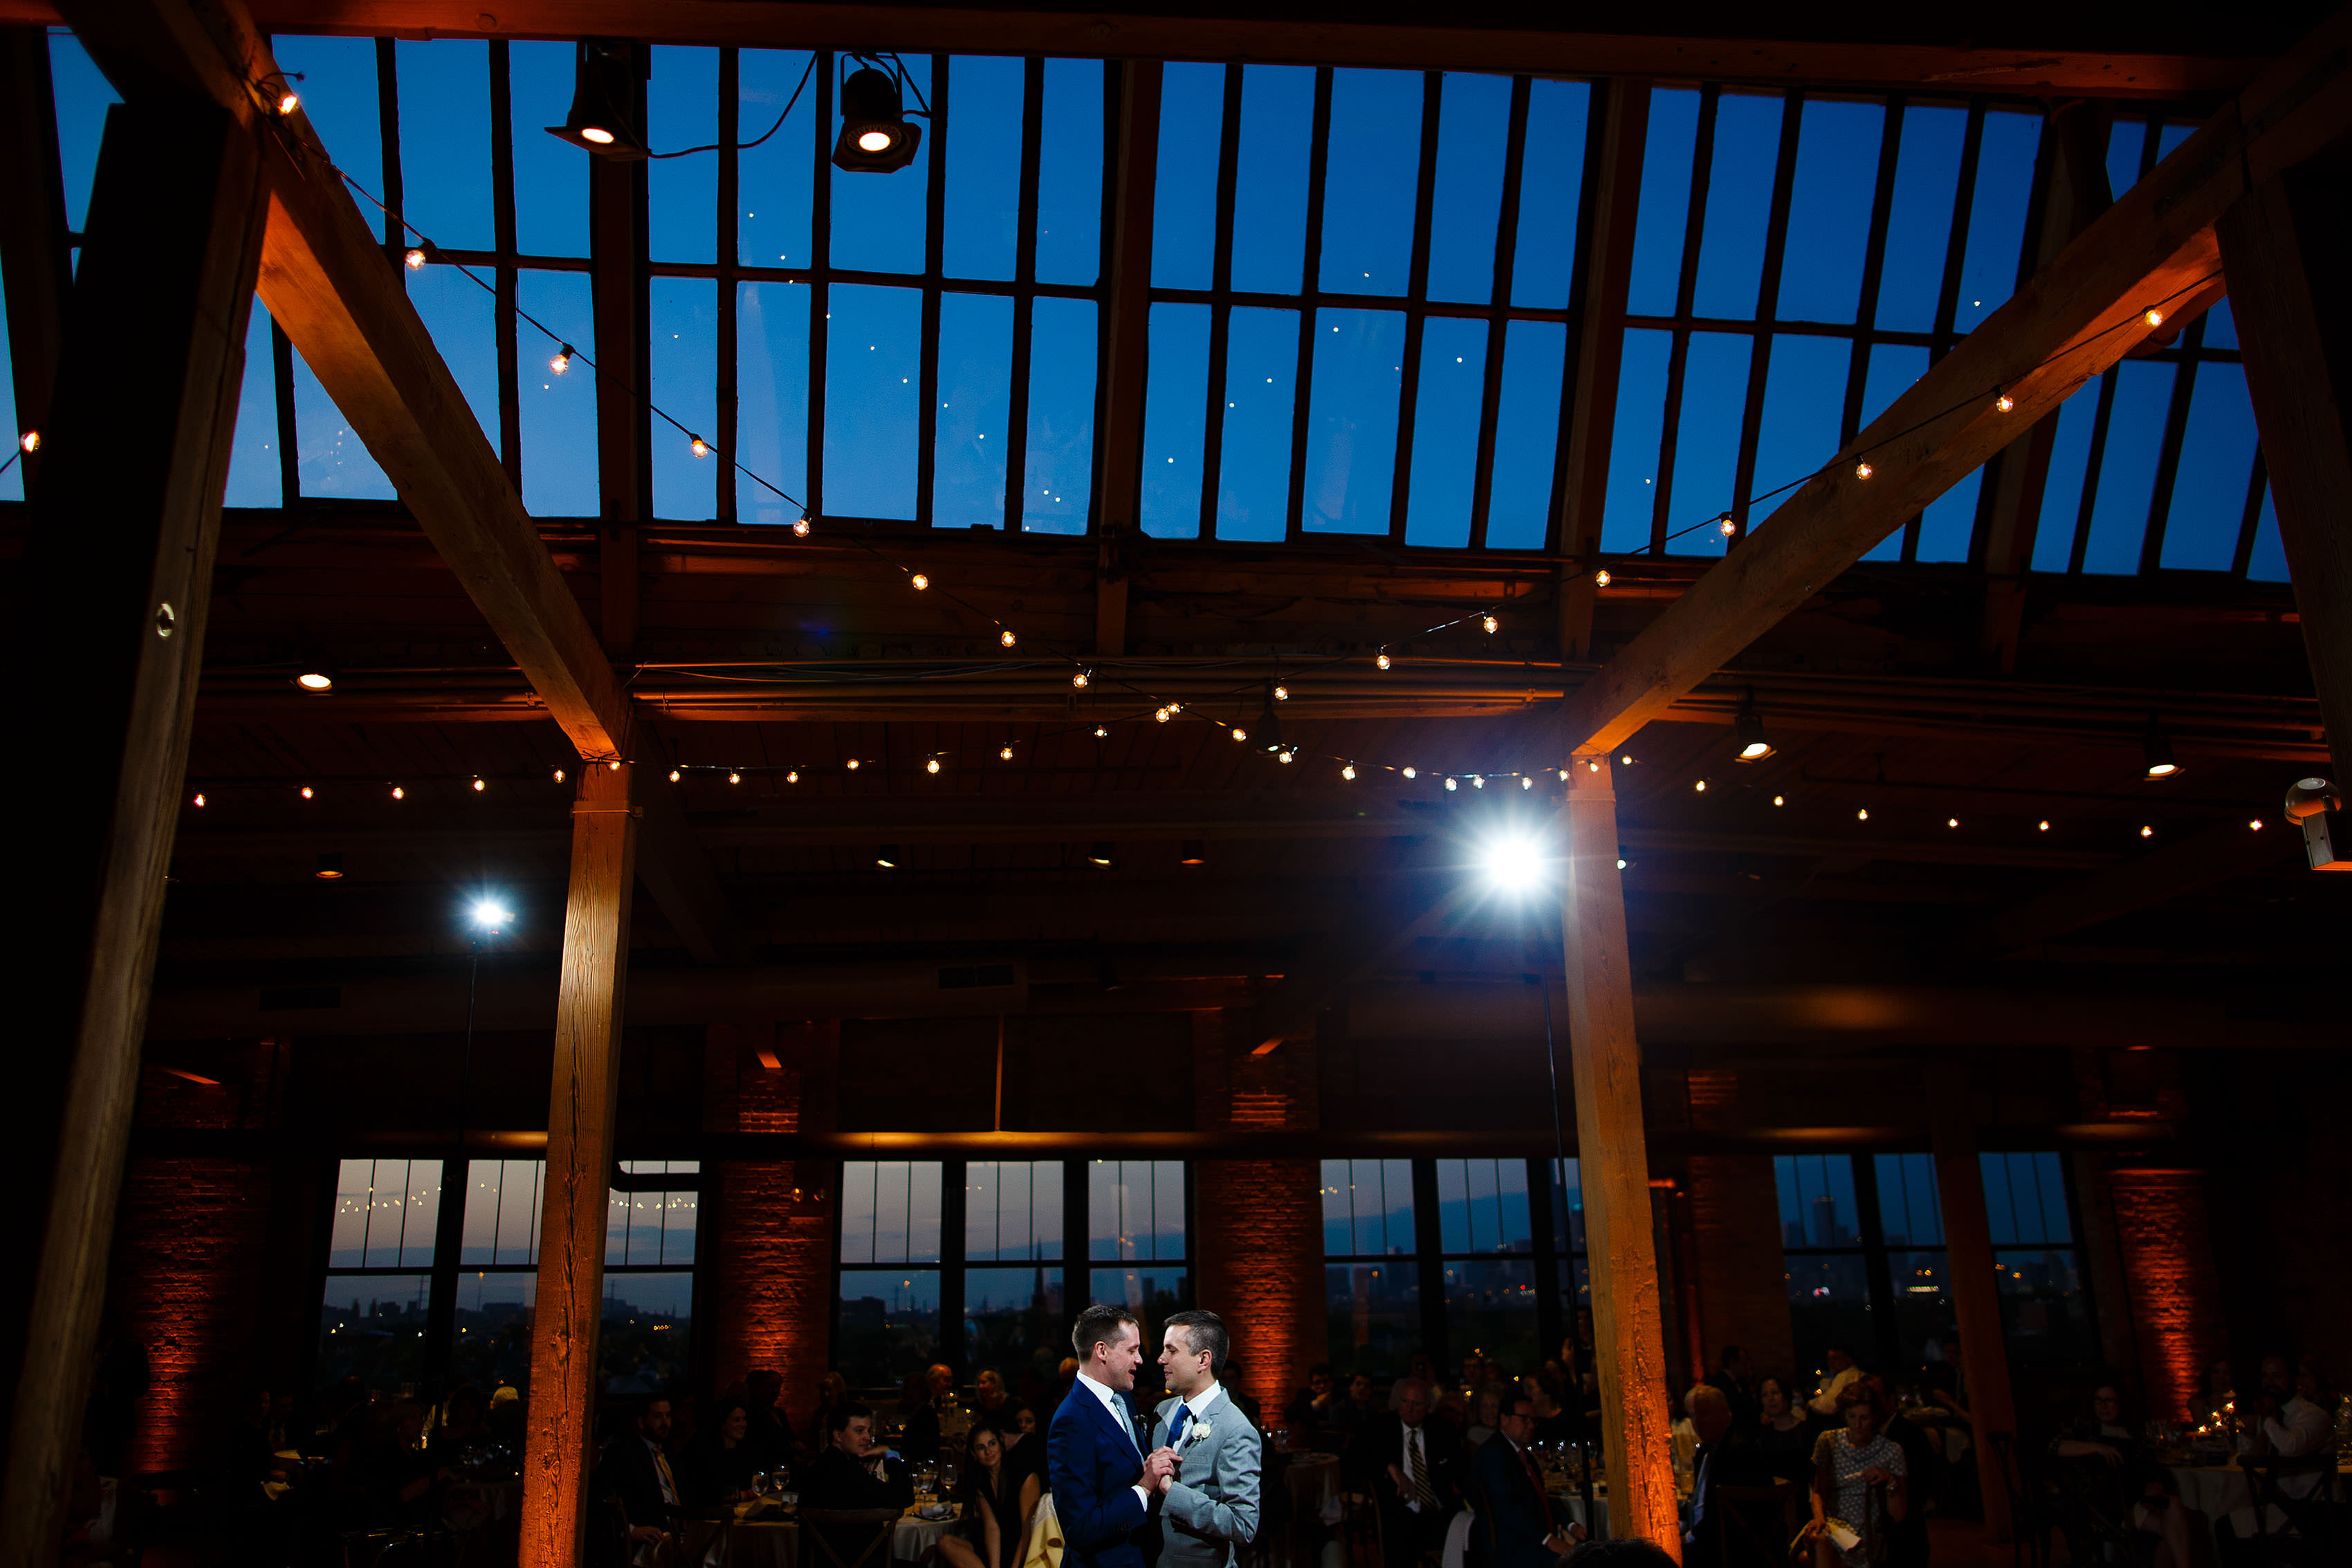 The grooms share a first dance during twilight at their Bridgeport Art Center wedding in Chicago